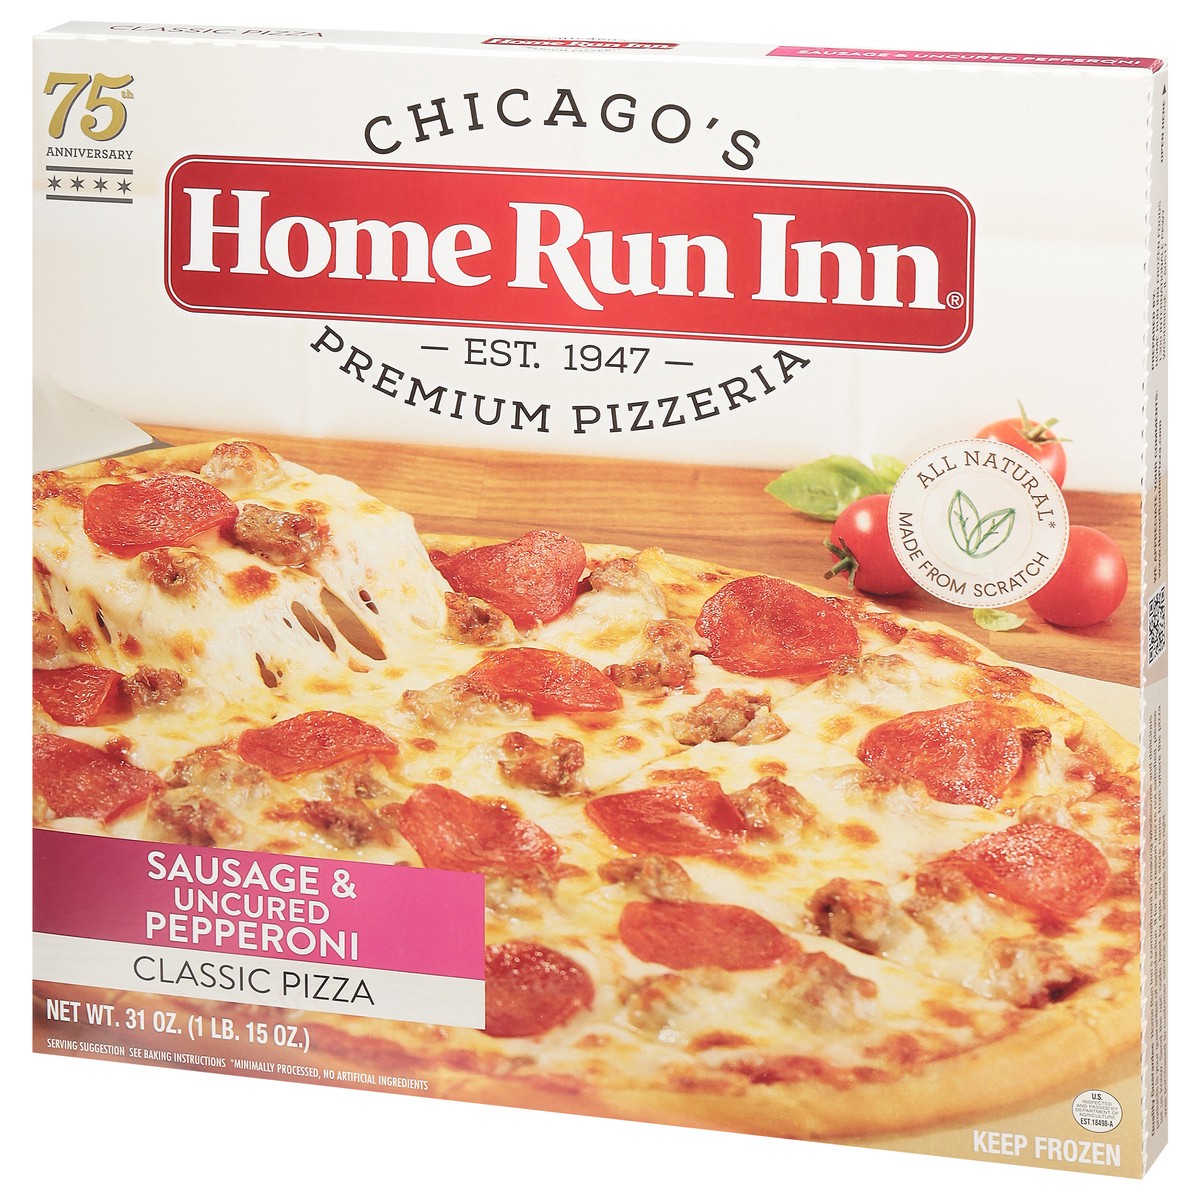 slide 3 of 9, Home Run Inn Family Size Classic Frozen Sausage and Uncured Pepperoni Pizza, 31 oz, 31 oz